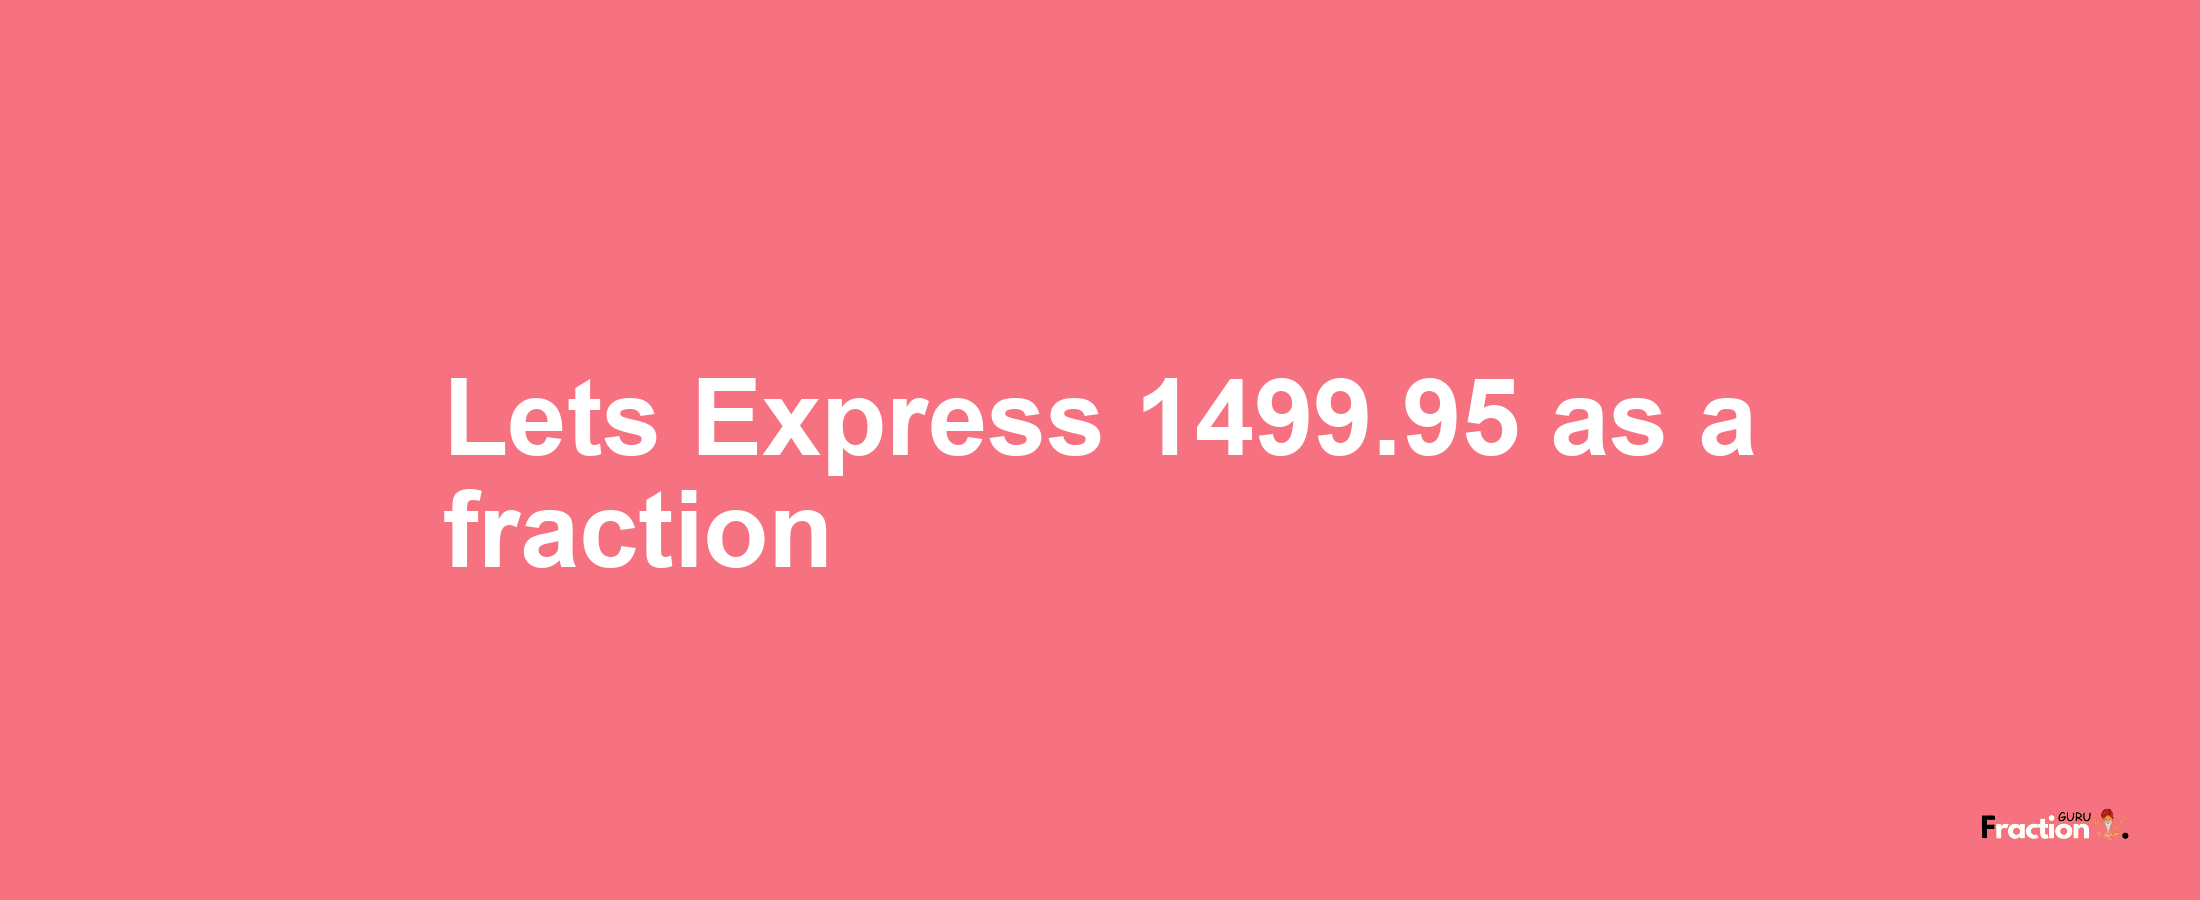 Lets Express 1499.95 as afraction